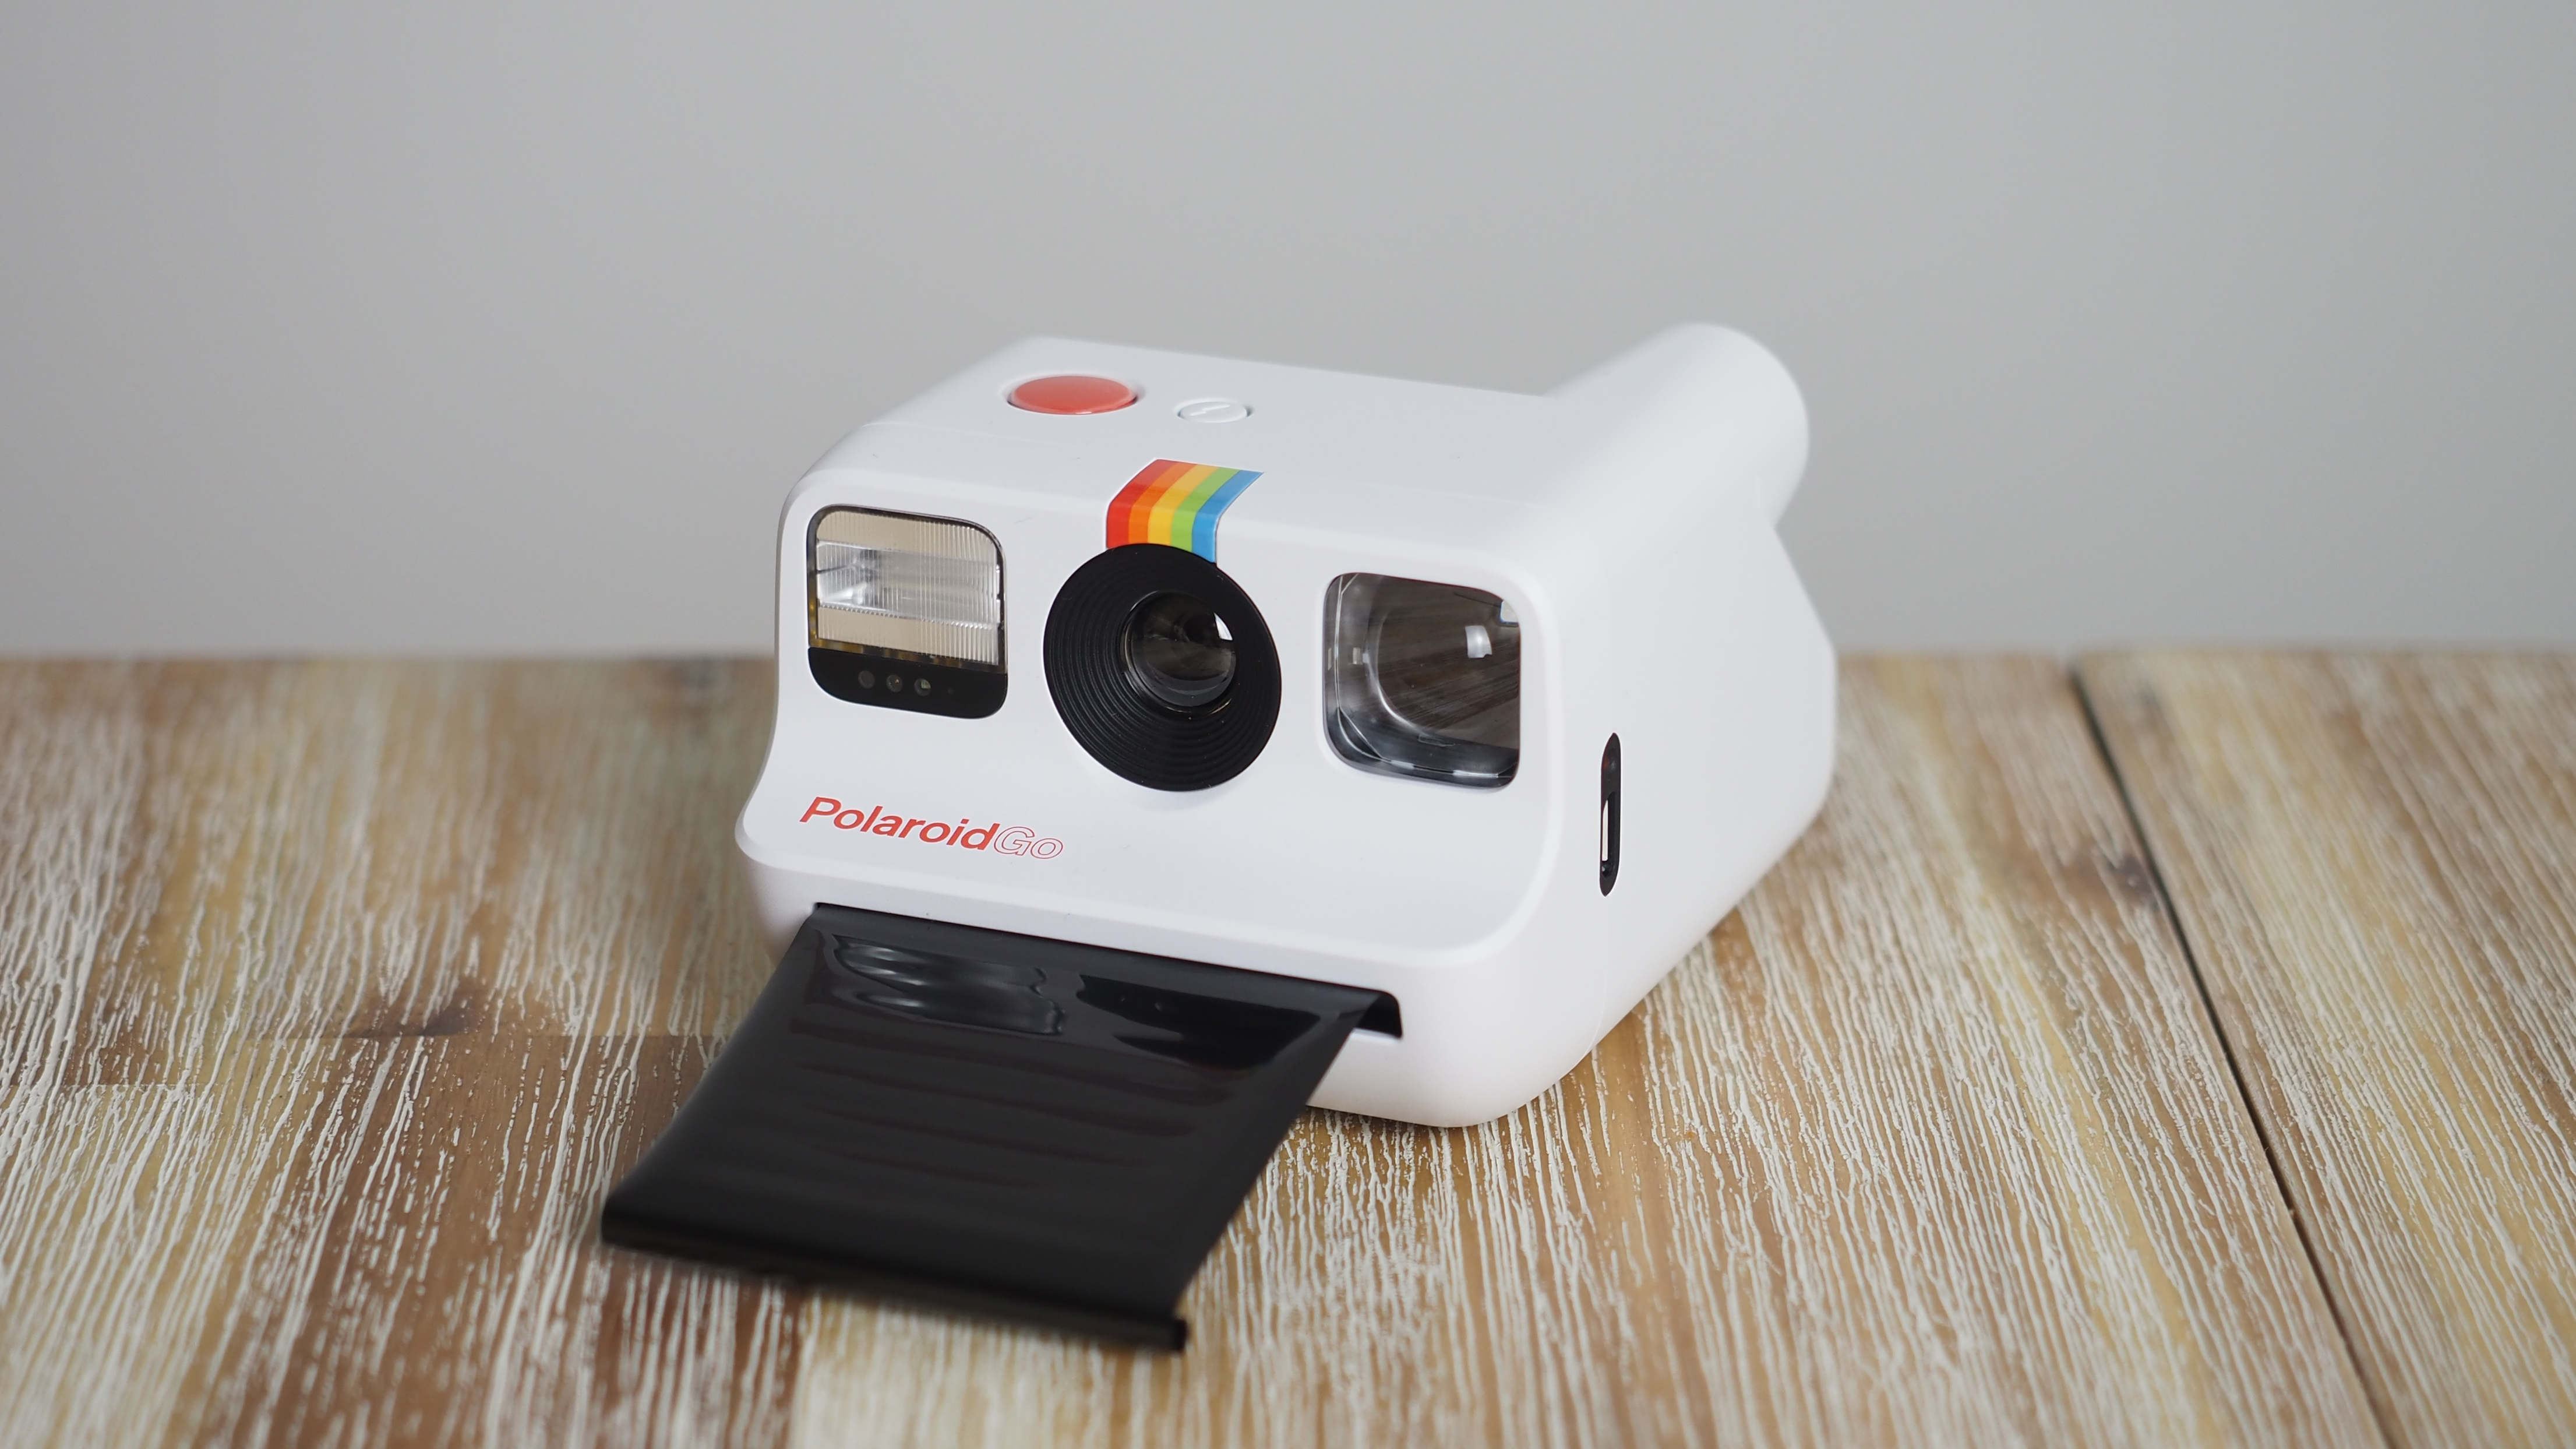 Hands on With the Polaroid Go, a Tiny $100 Instant Camera